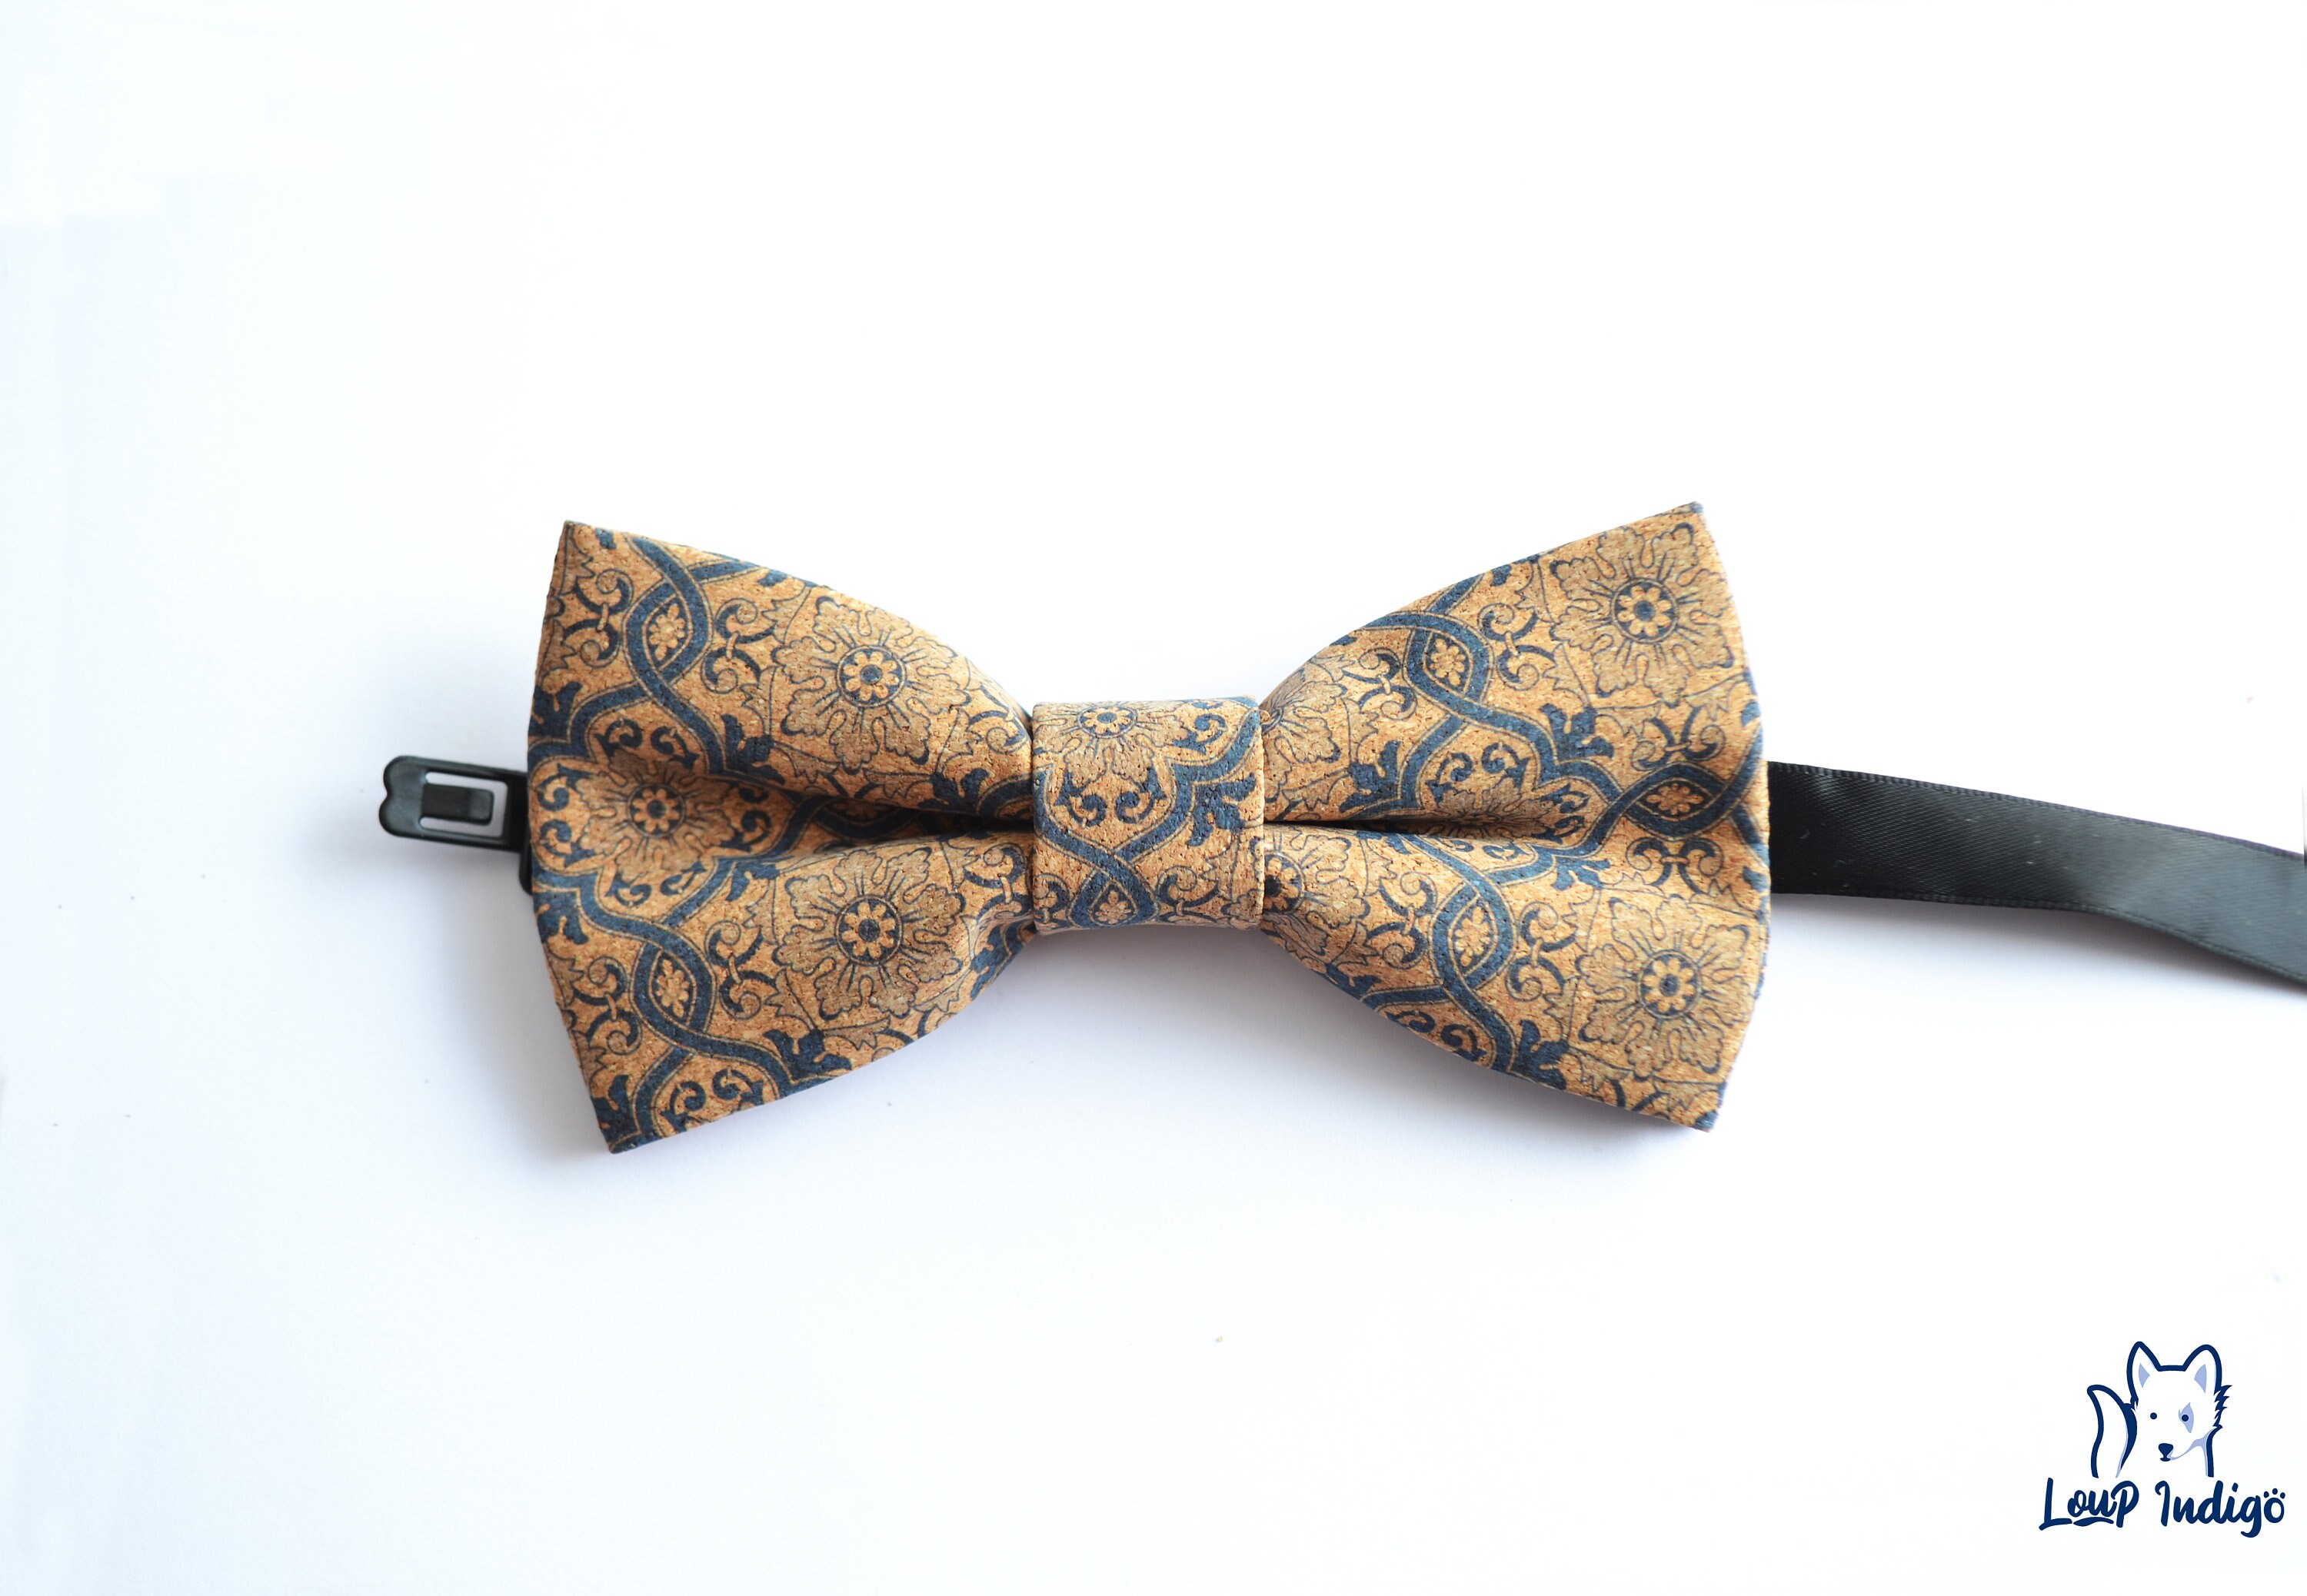 Cork Bow Tie for Adult le Neuf Blue/grey 